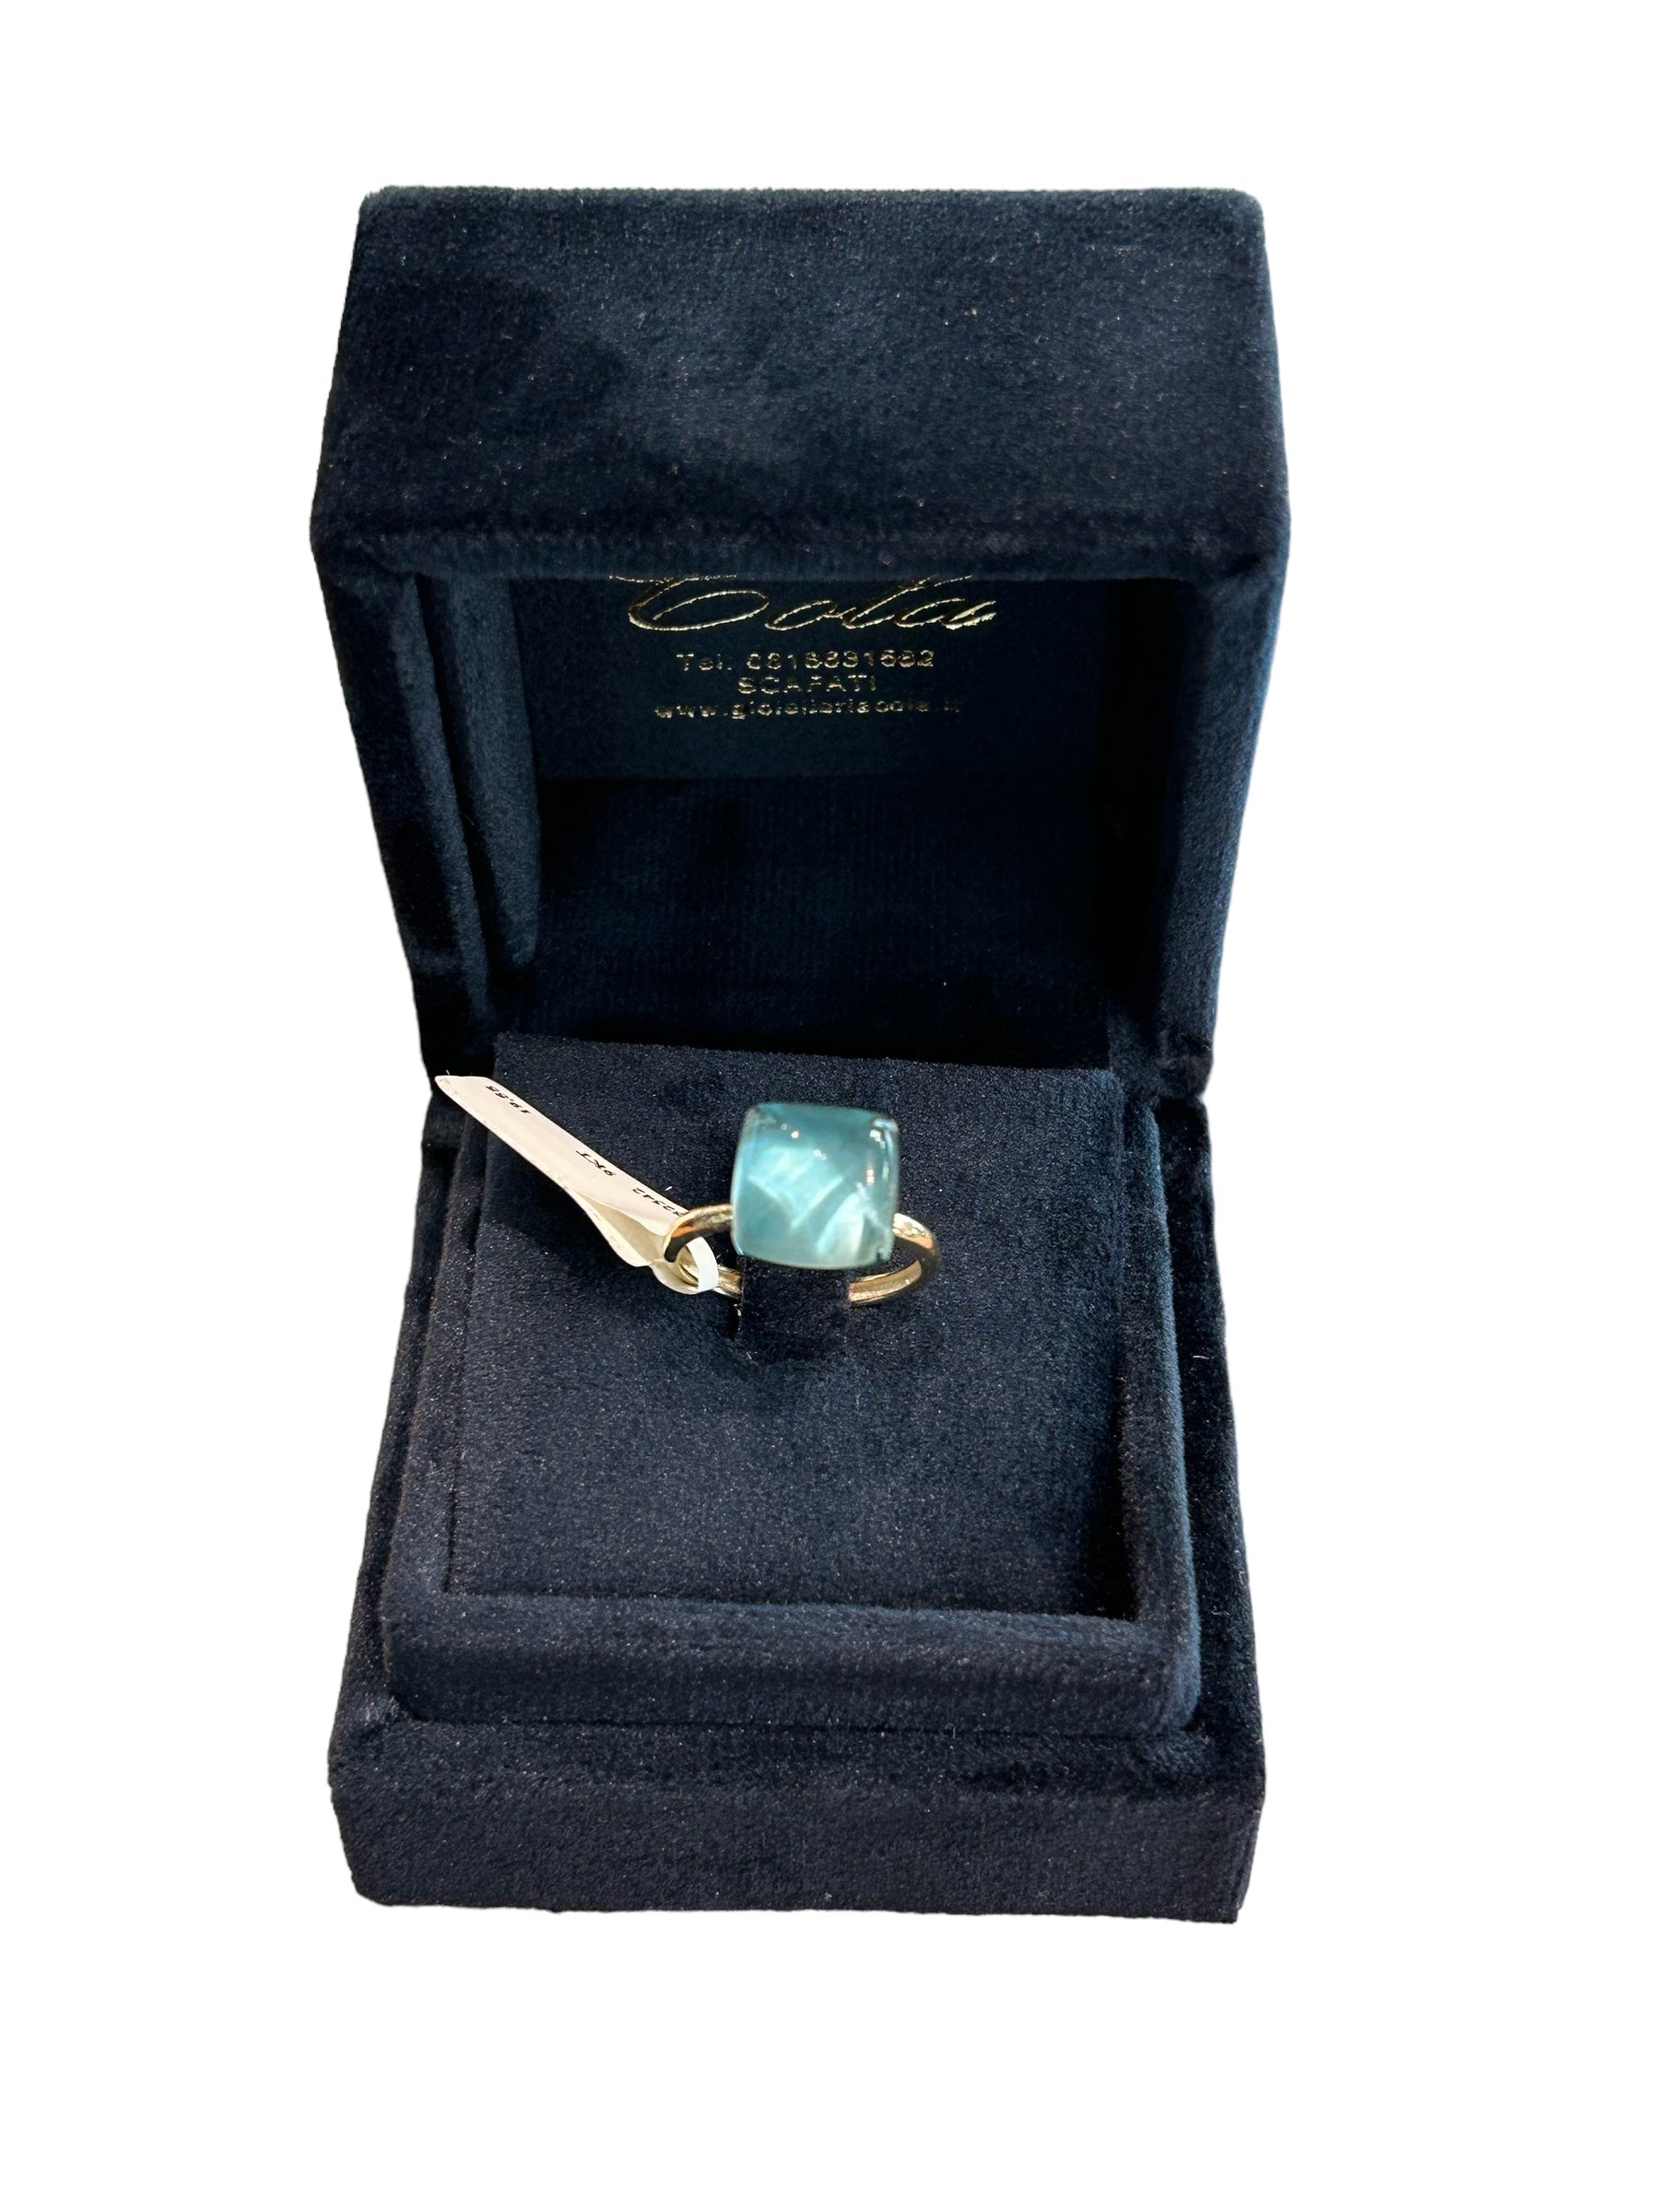 Mazza - 9kt gold ring and light blue topaz-type stone - AN CUBIC